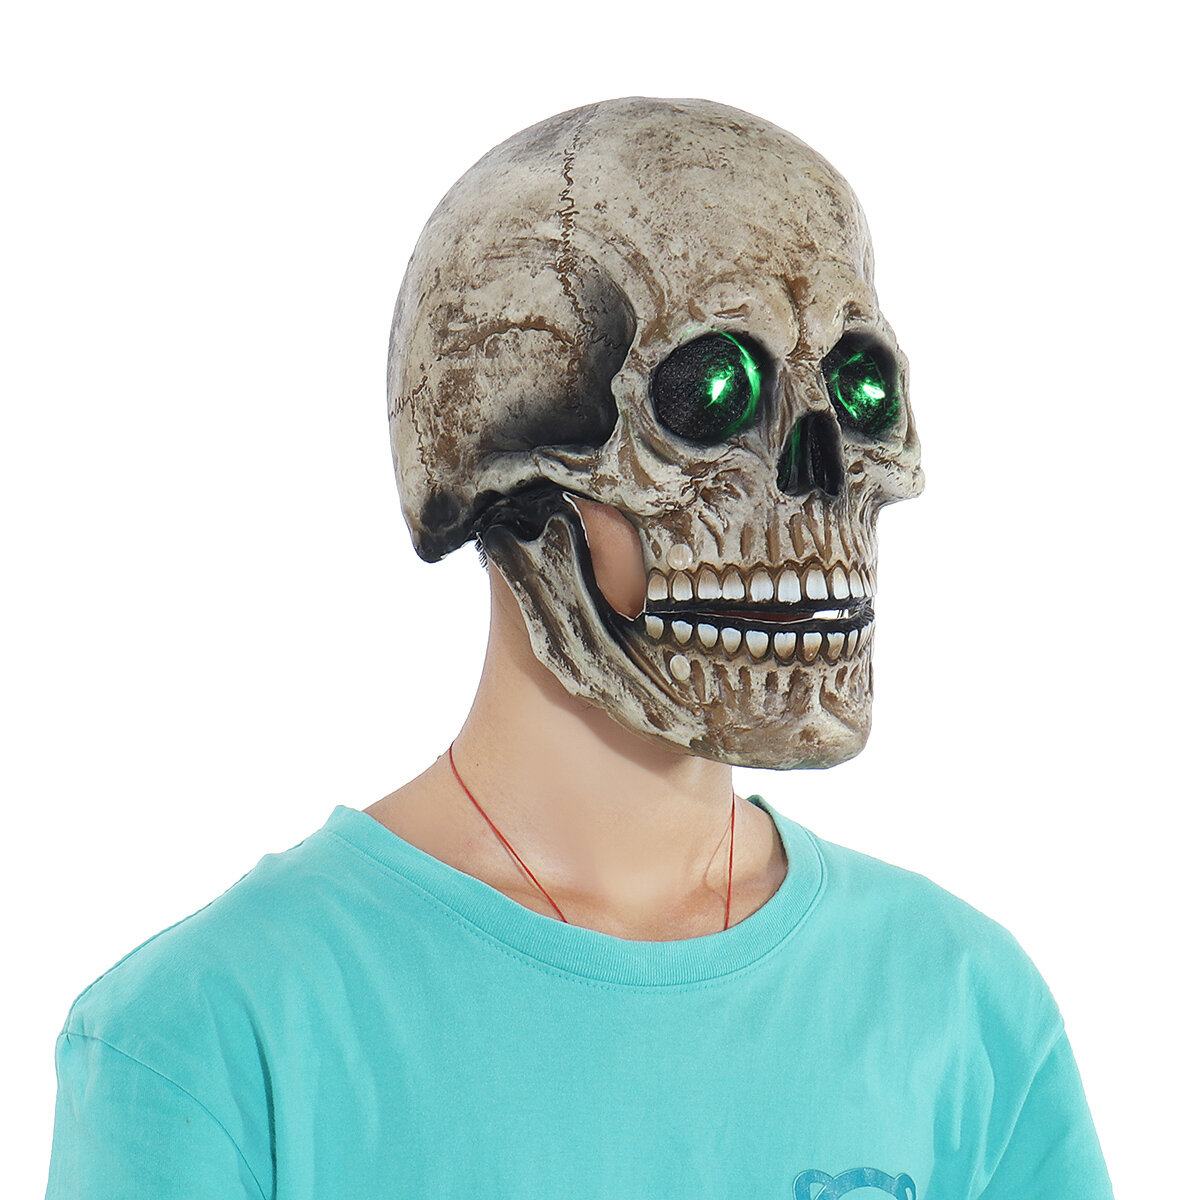 Halloween Movable Mouth Skeleton Mask Cosplay Horror Latex Mask Headgear w/ LED